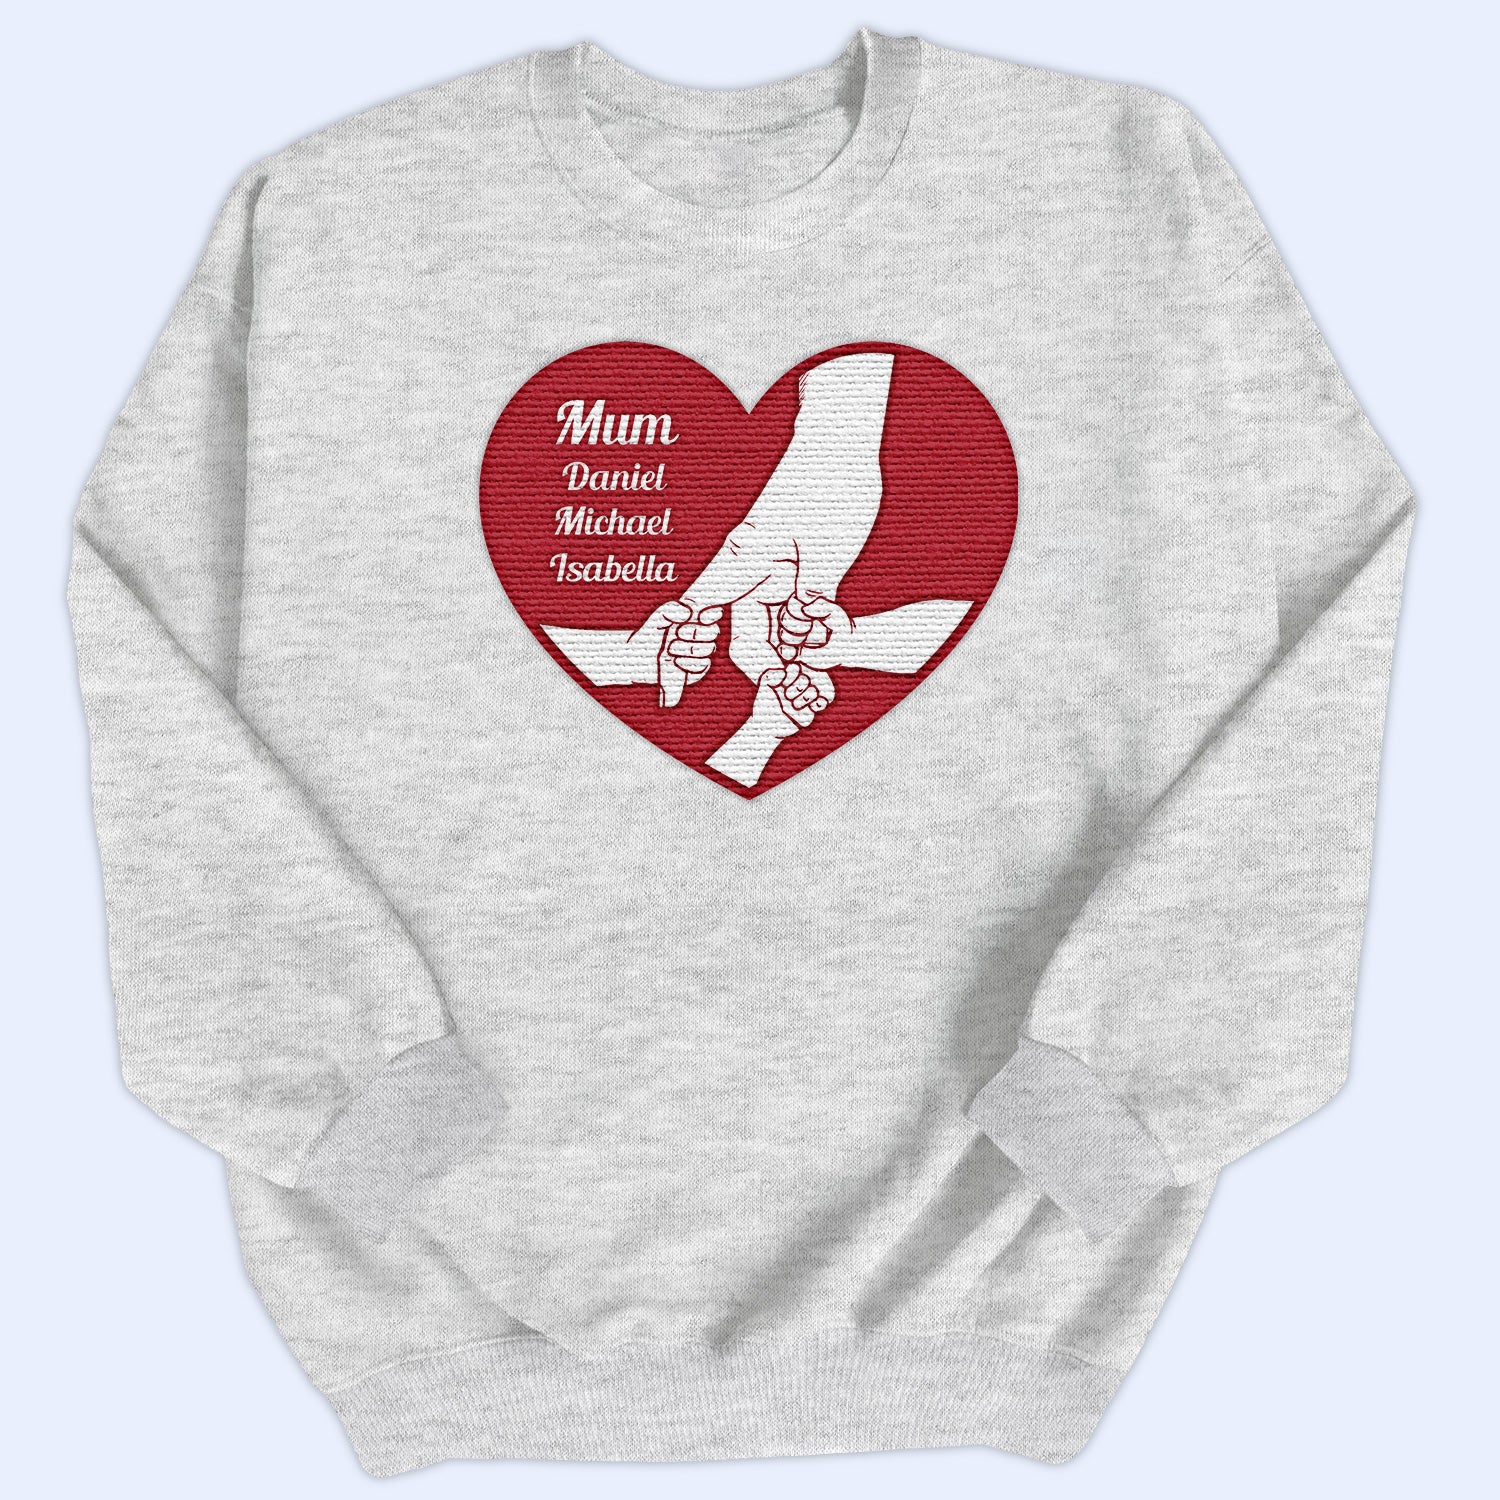 Hand In Hand - Birthday, Loving Gift For Nana, Papa, Mom, Dad - Personalized Embroidered Sweatshirt